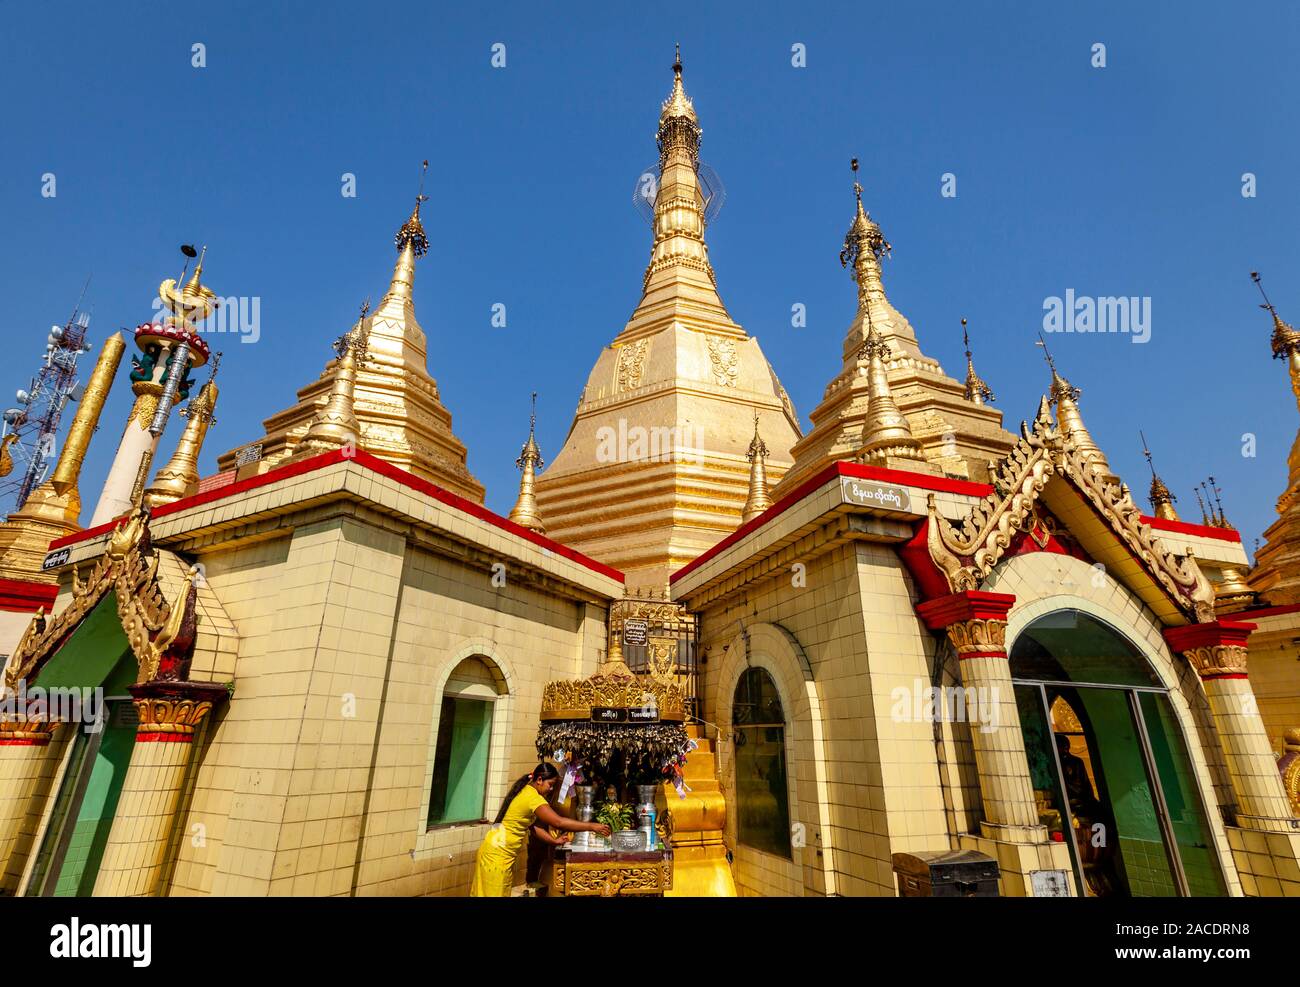 A Young Woman Pouring A Cup Of Water Over A Small Buddha Statue, Sule Pagoda, Yangon, Myanmar. Stock Photo